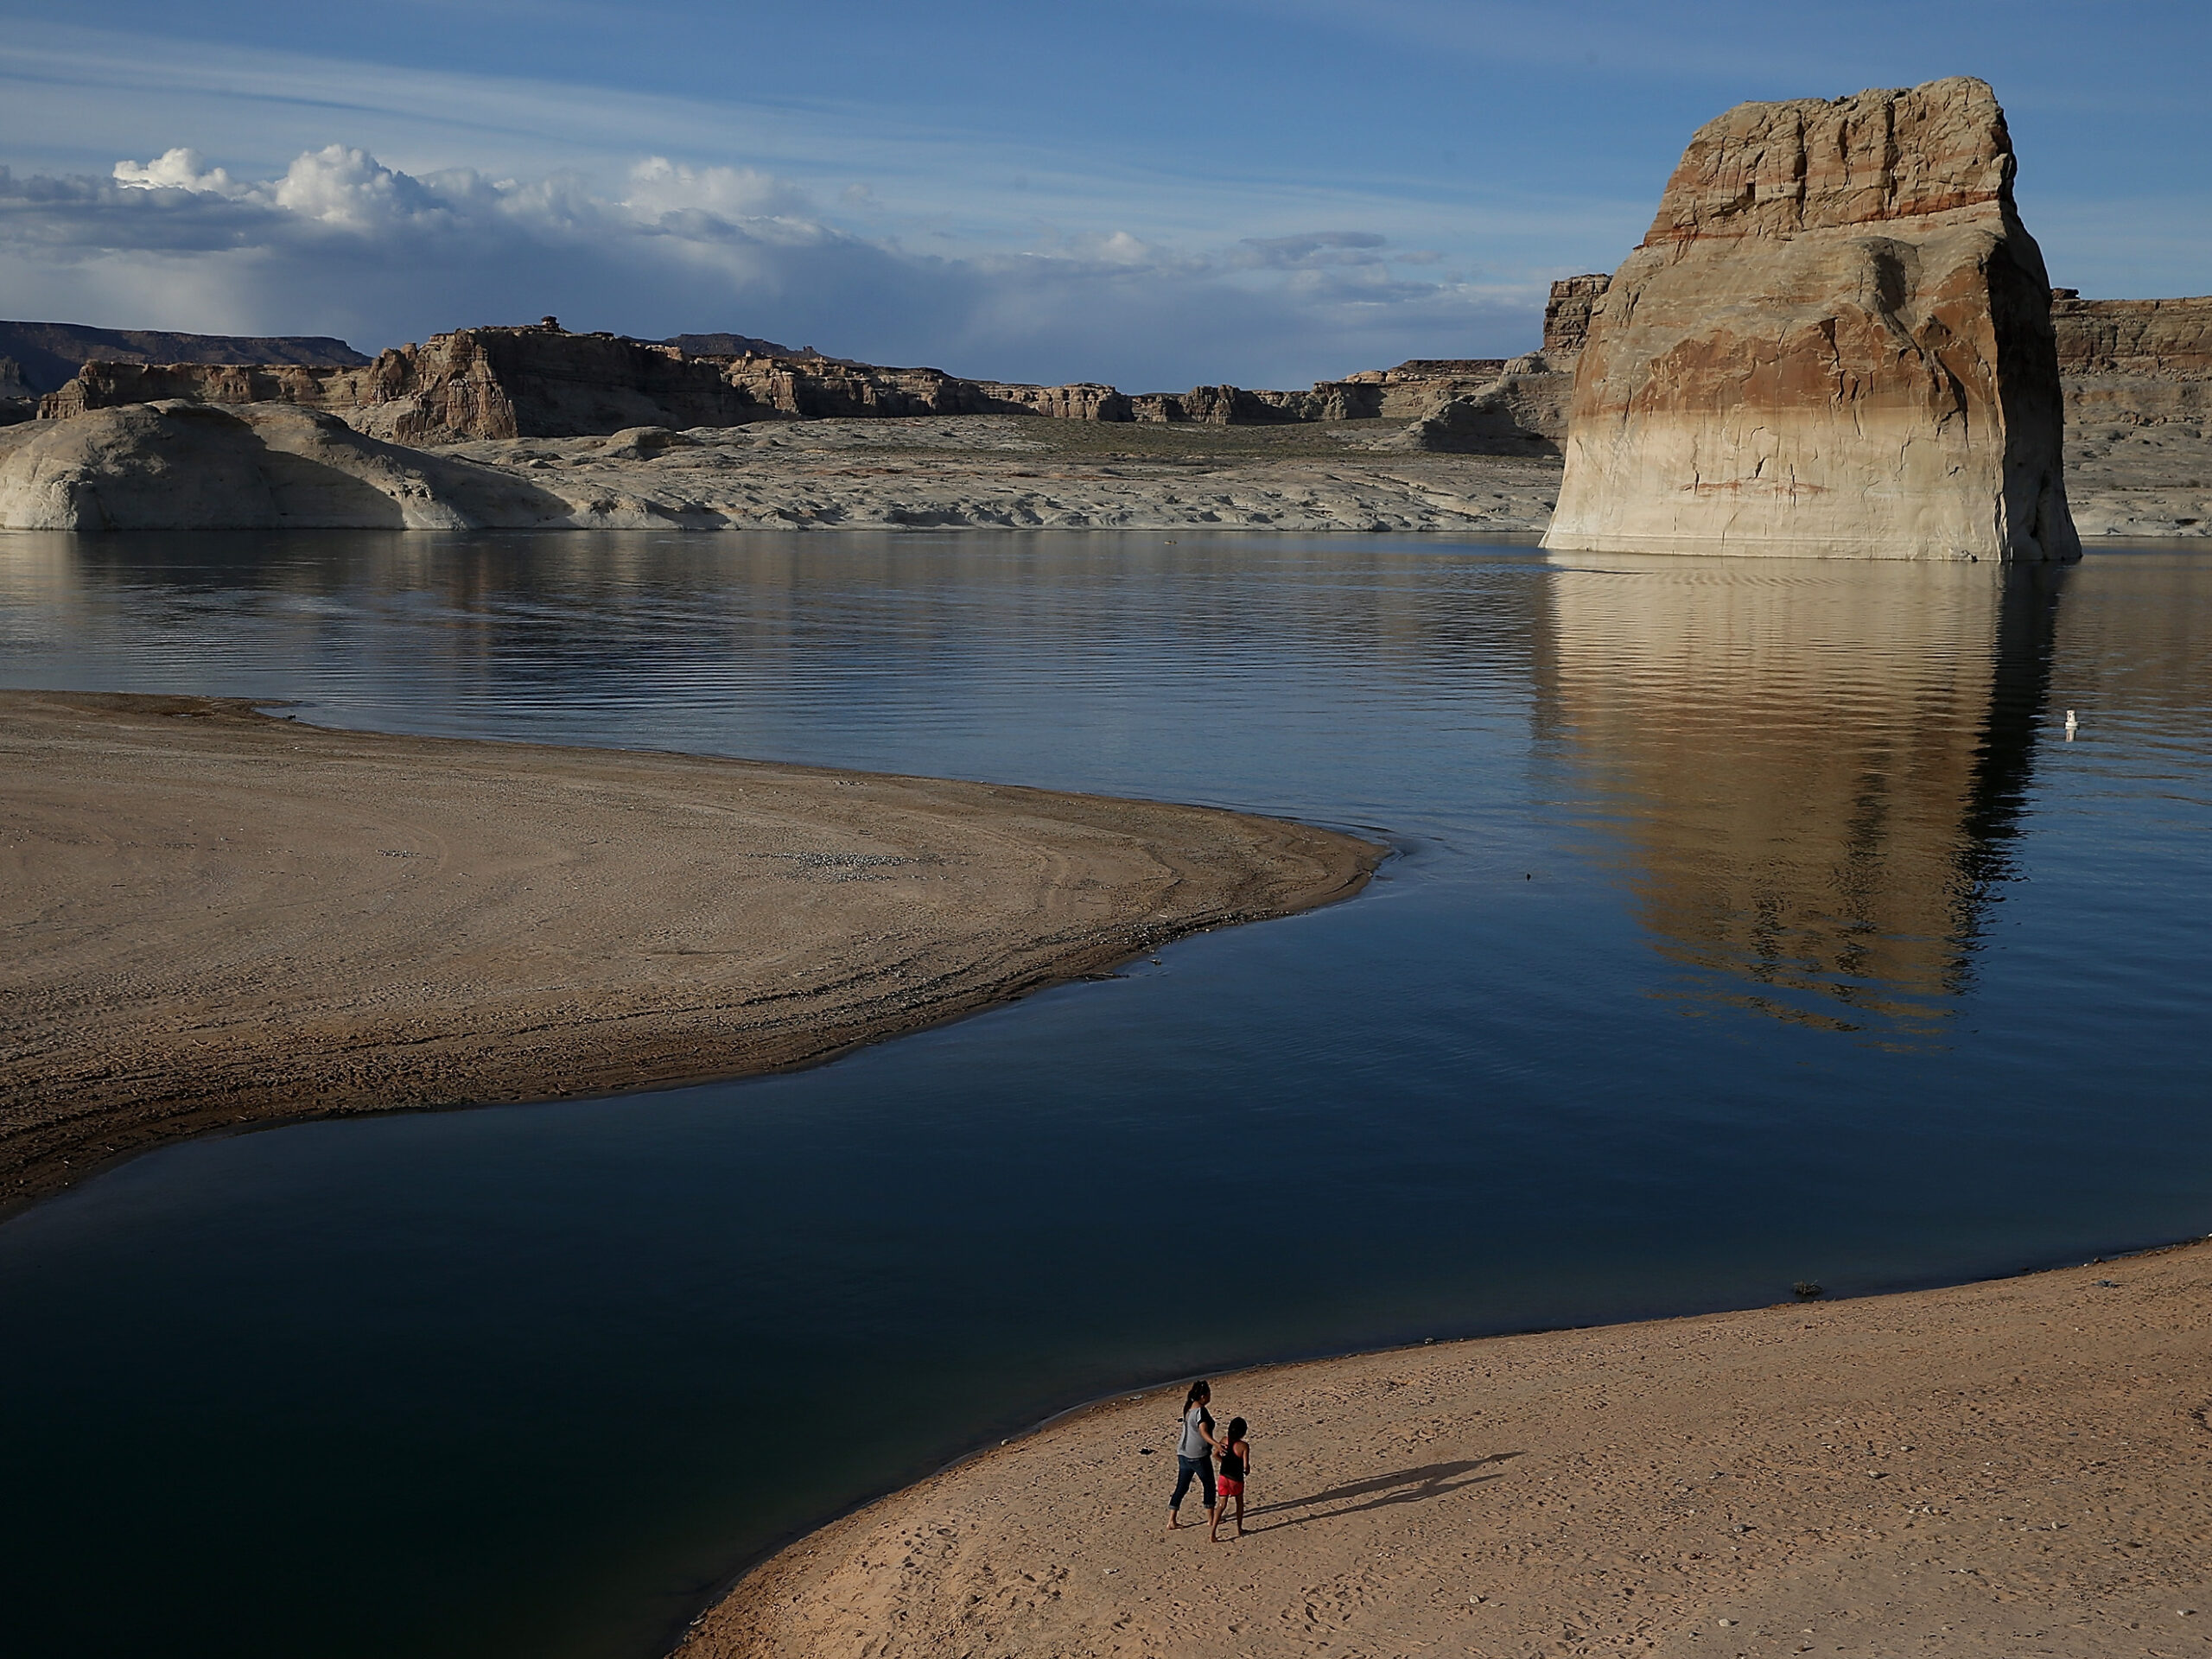 The country's two biggest reservoirs are on the Colorado River. Water levels at Lake Powell have dropped steeply during the two-decade megadrought.